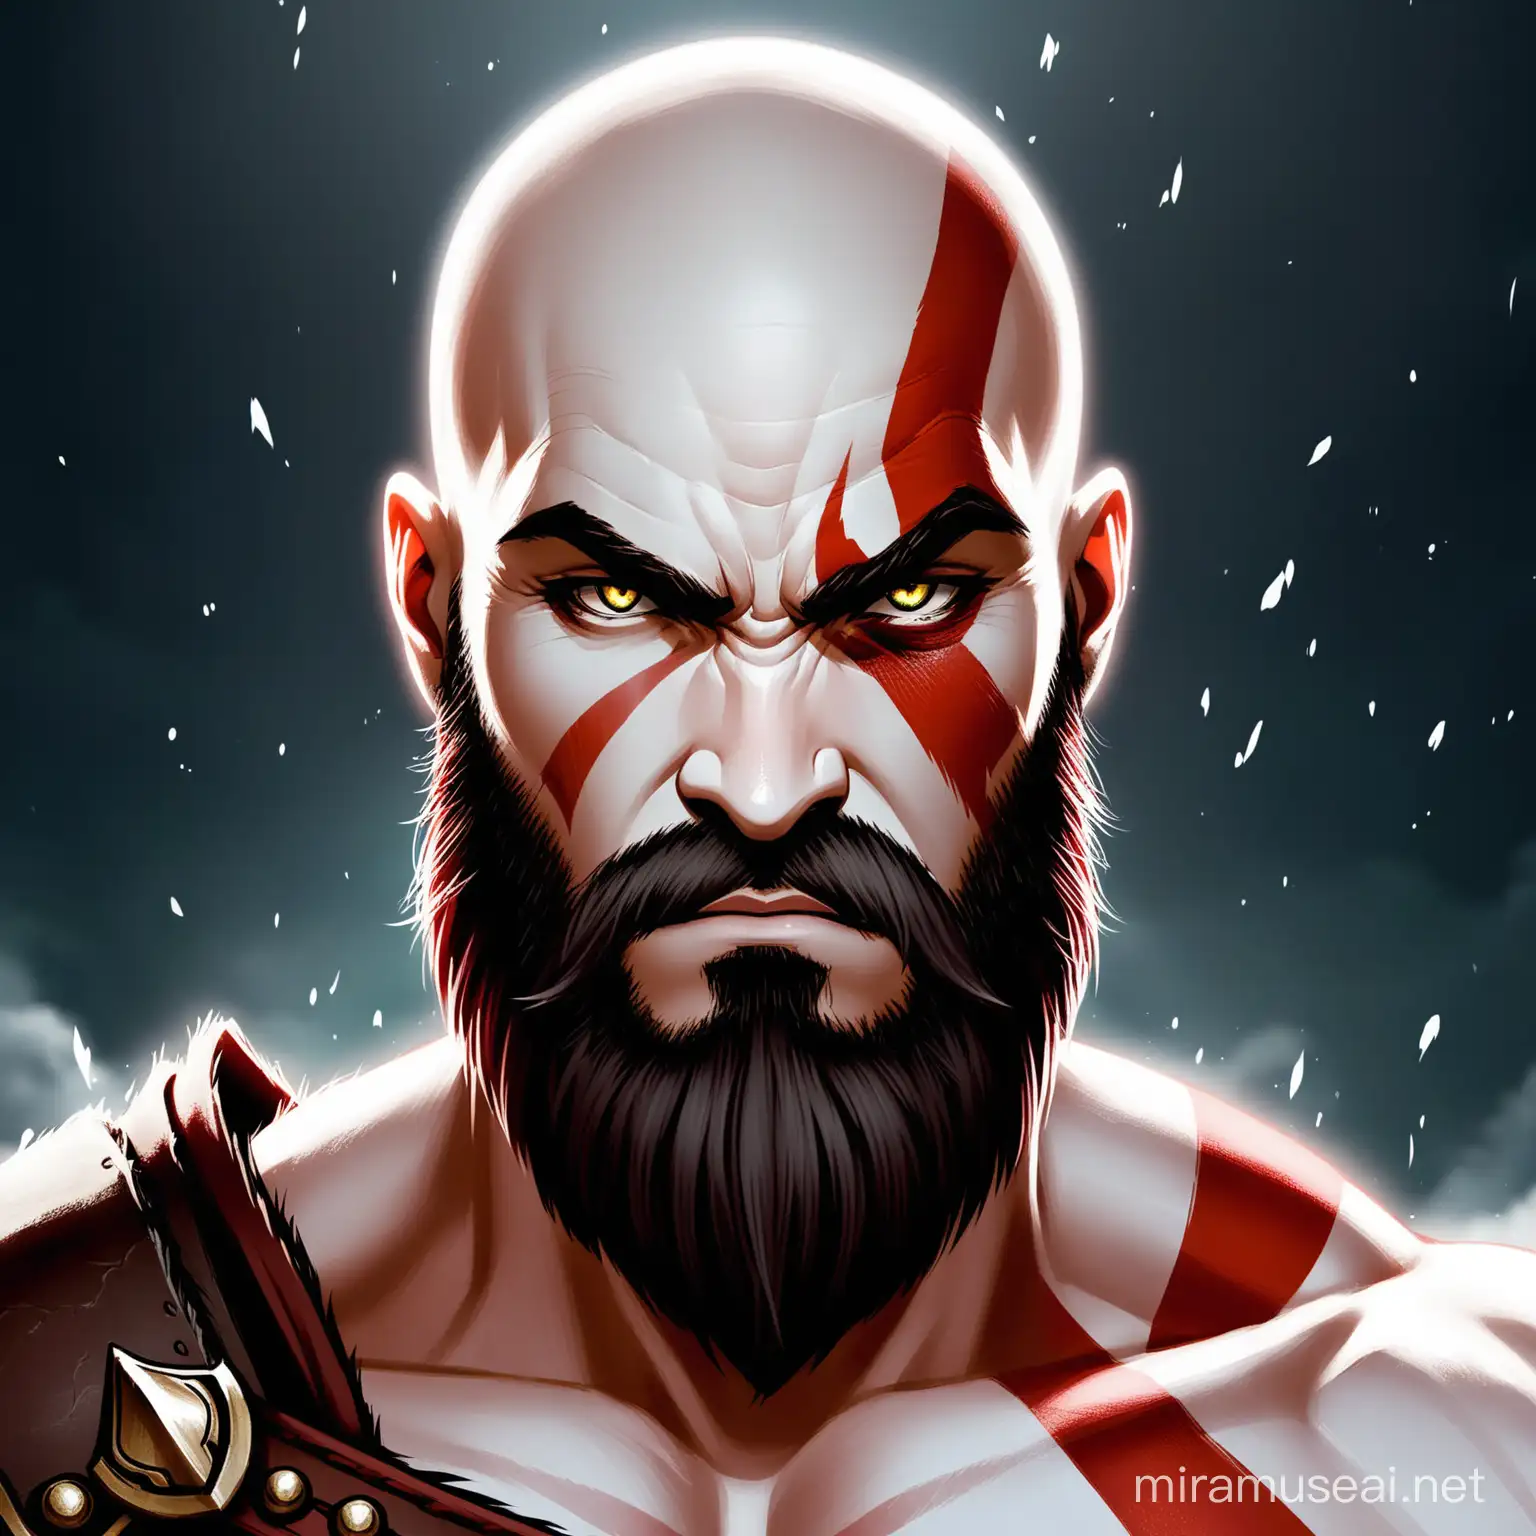 A frontal picture of Kratos from God of War Ragnarok looking at the camera